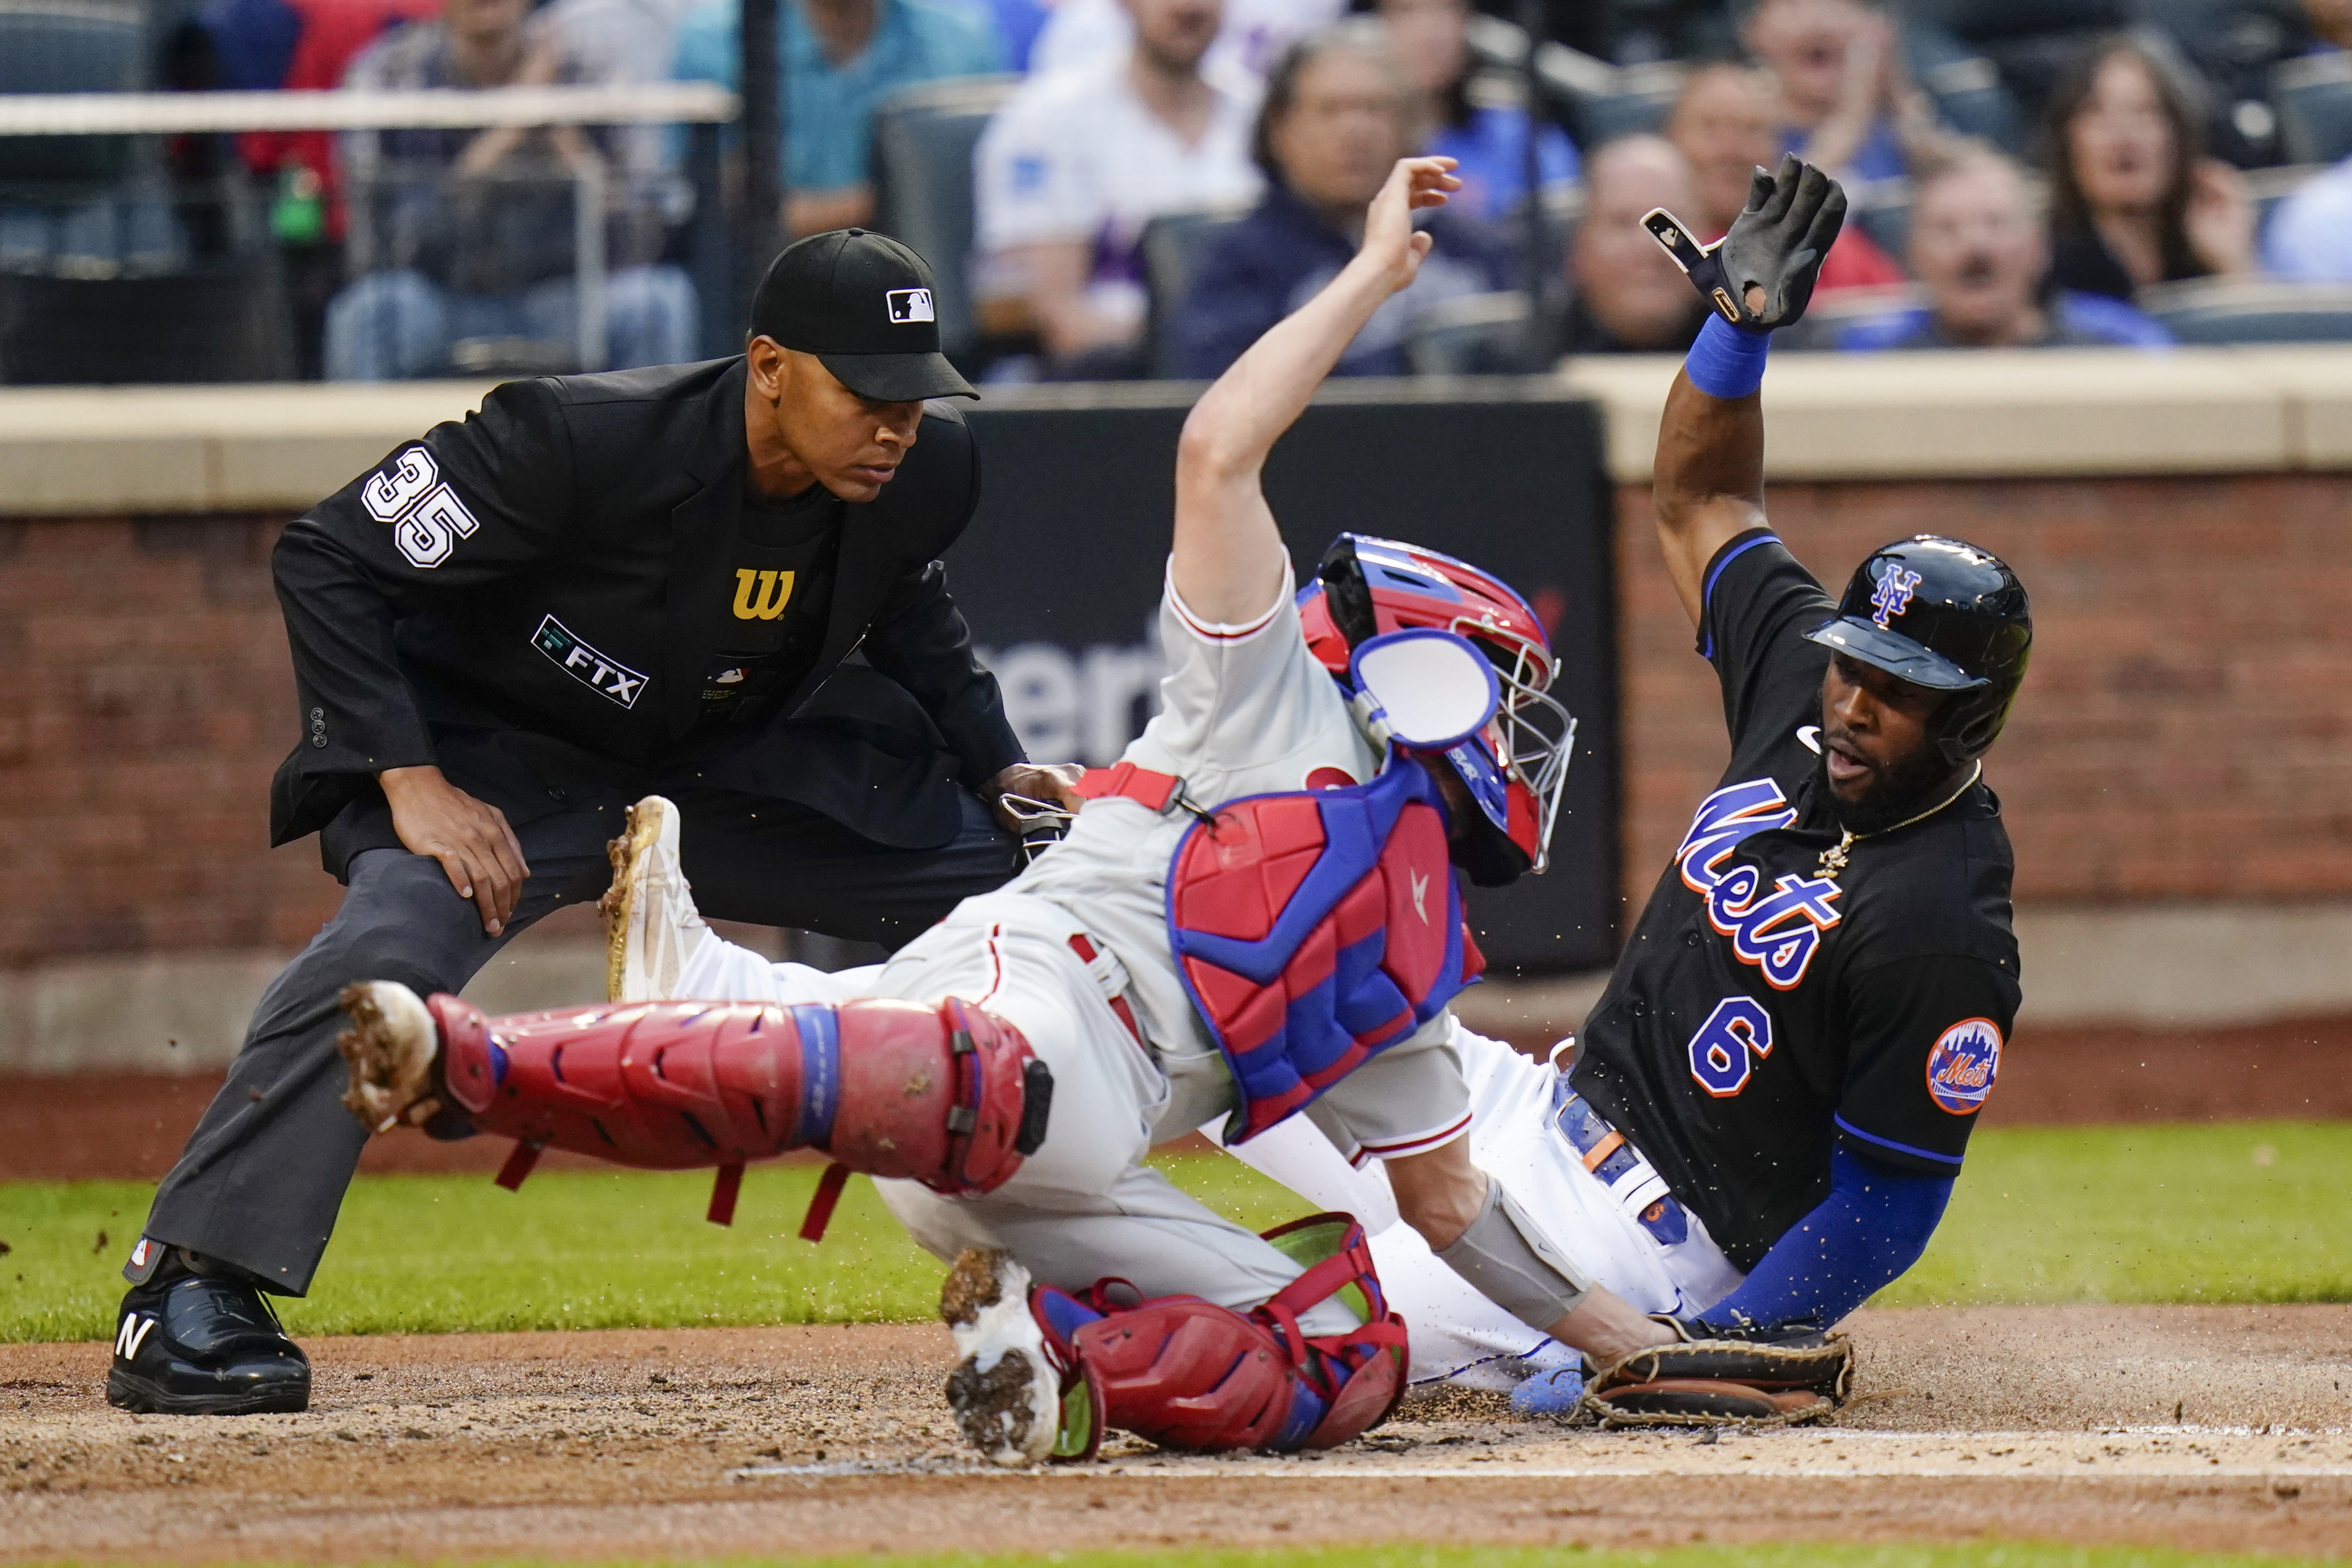 Three 'managers' didn't stop Starling Marte from running Mets out of inning